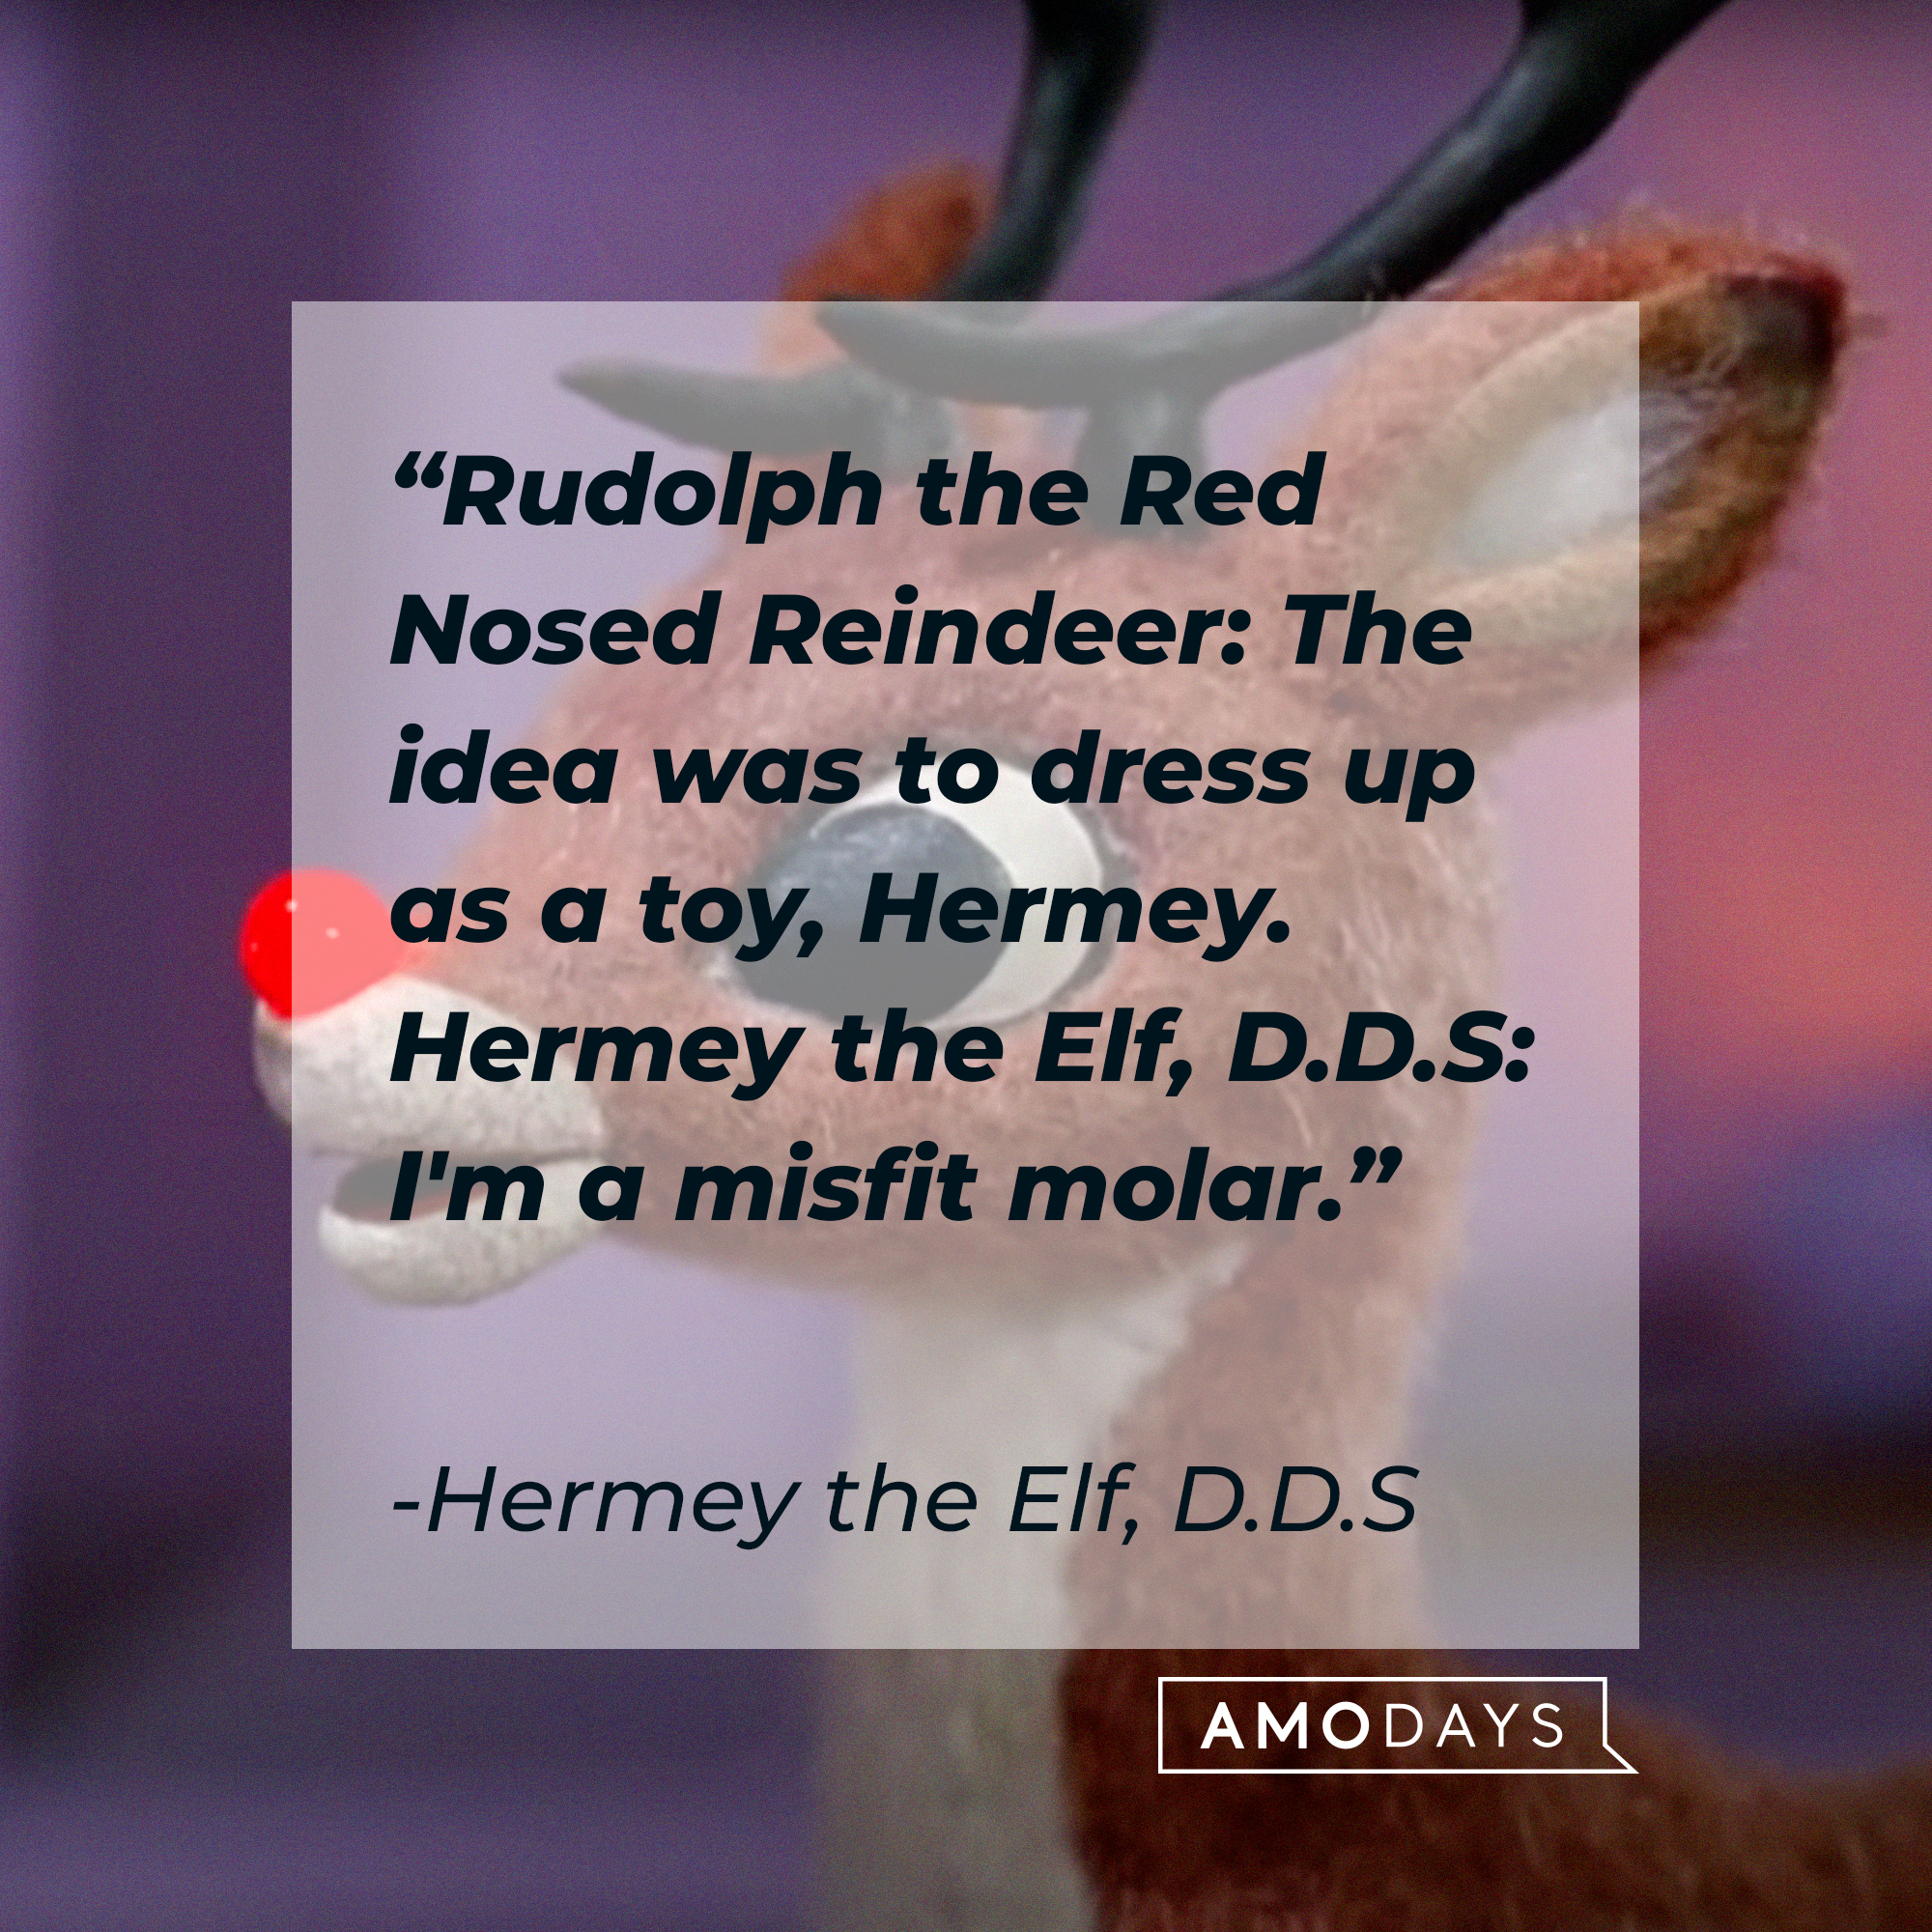 Hermey the Elf, D.D.S's quote: “Rudolph the Red Nosed Reindeer: The idea was to dress up as a toy, Hermey. Hermey the Elf, D.D.S: I'm a misfit molar.” | Source: facebook.com/Rudolph the Red-Nosed Reindeer